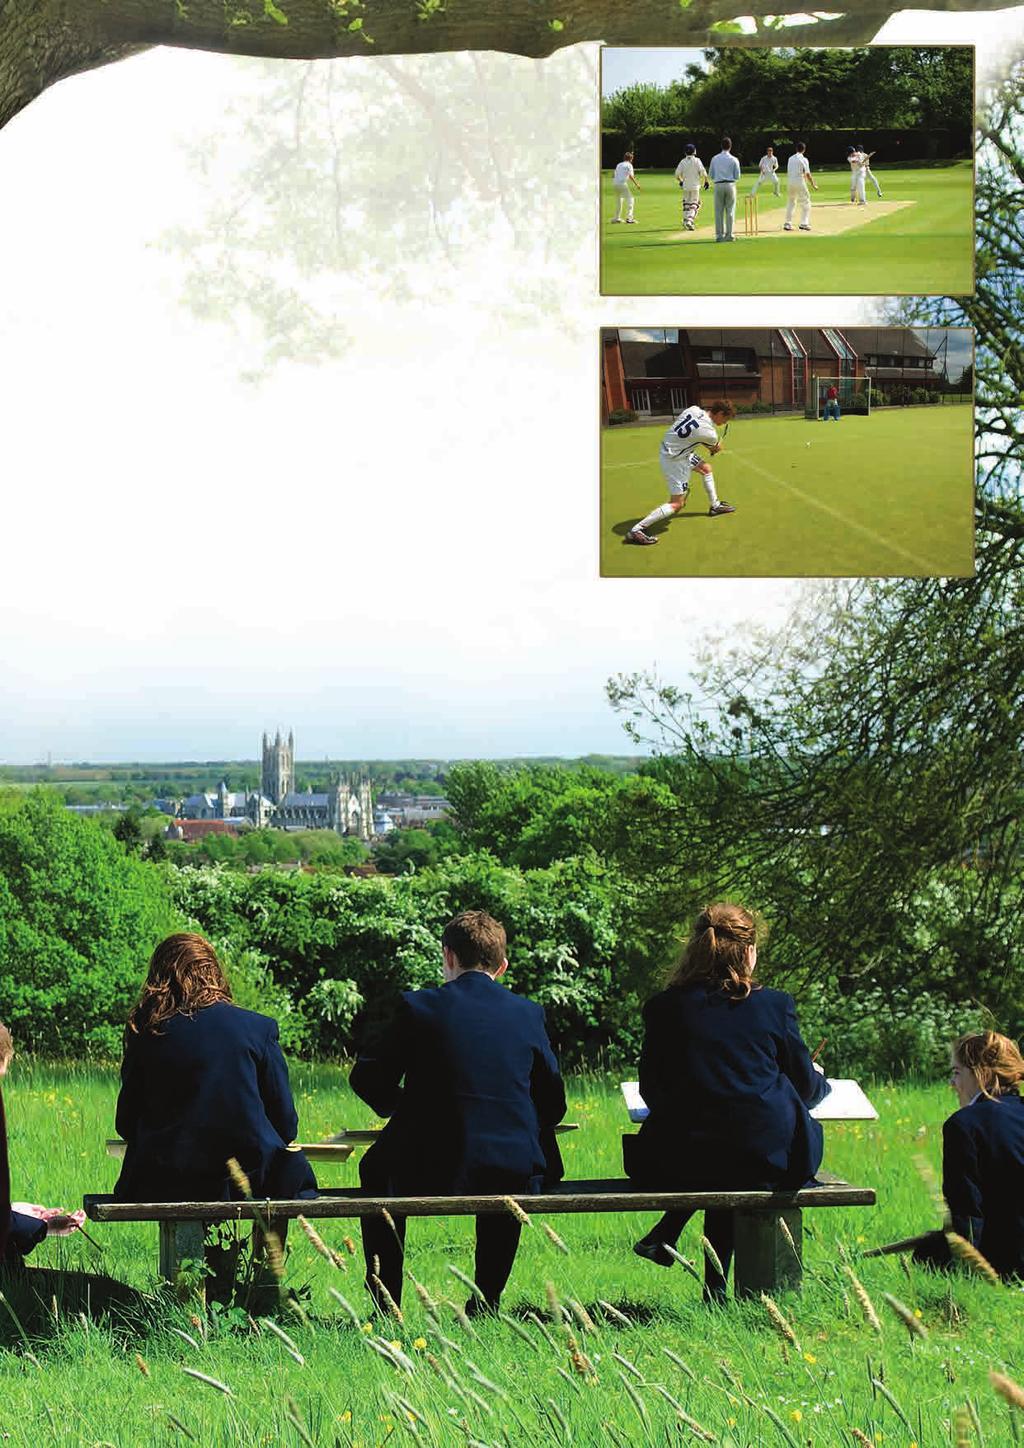 Space to Play Kent College s extensive facilities provide the perfect platform for challenge and development. This ensures pupils are rewarded with skills which enable them to be equipped for life.